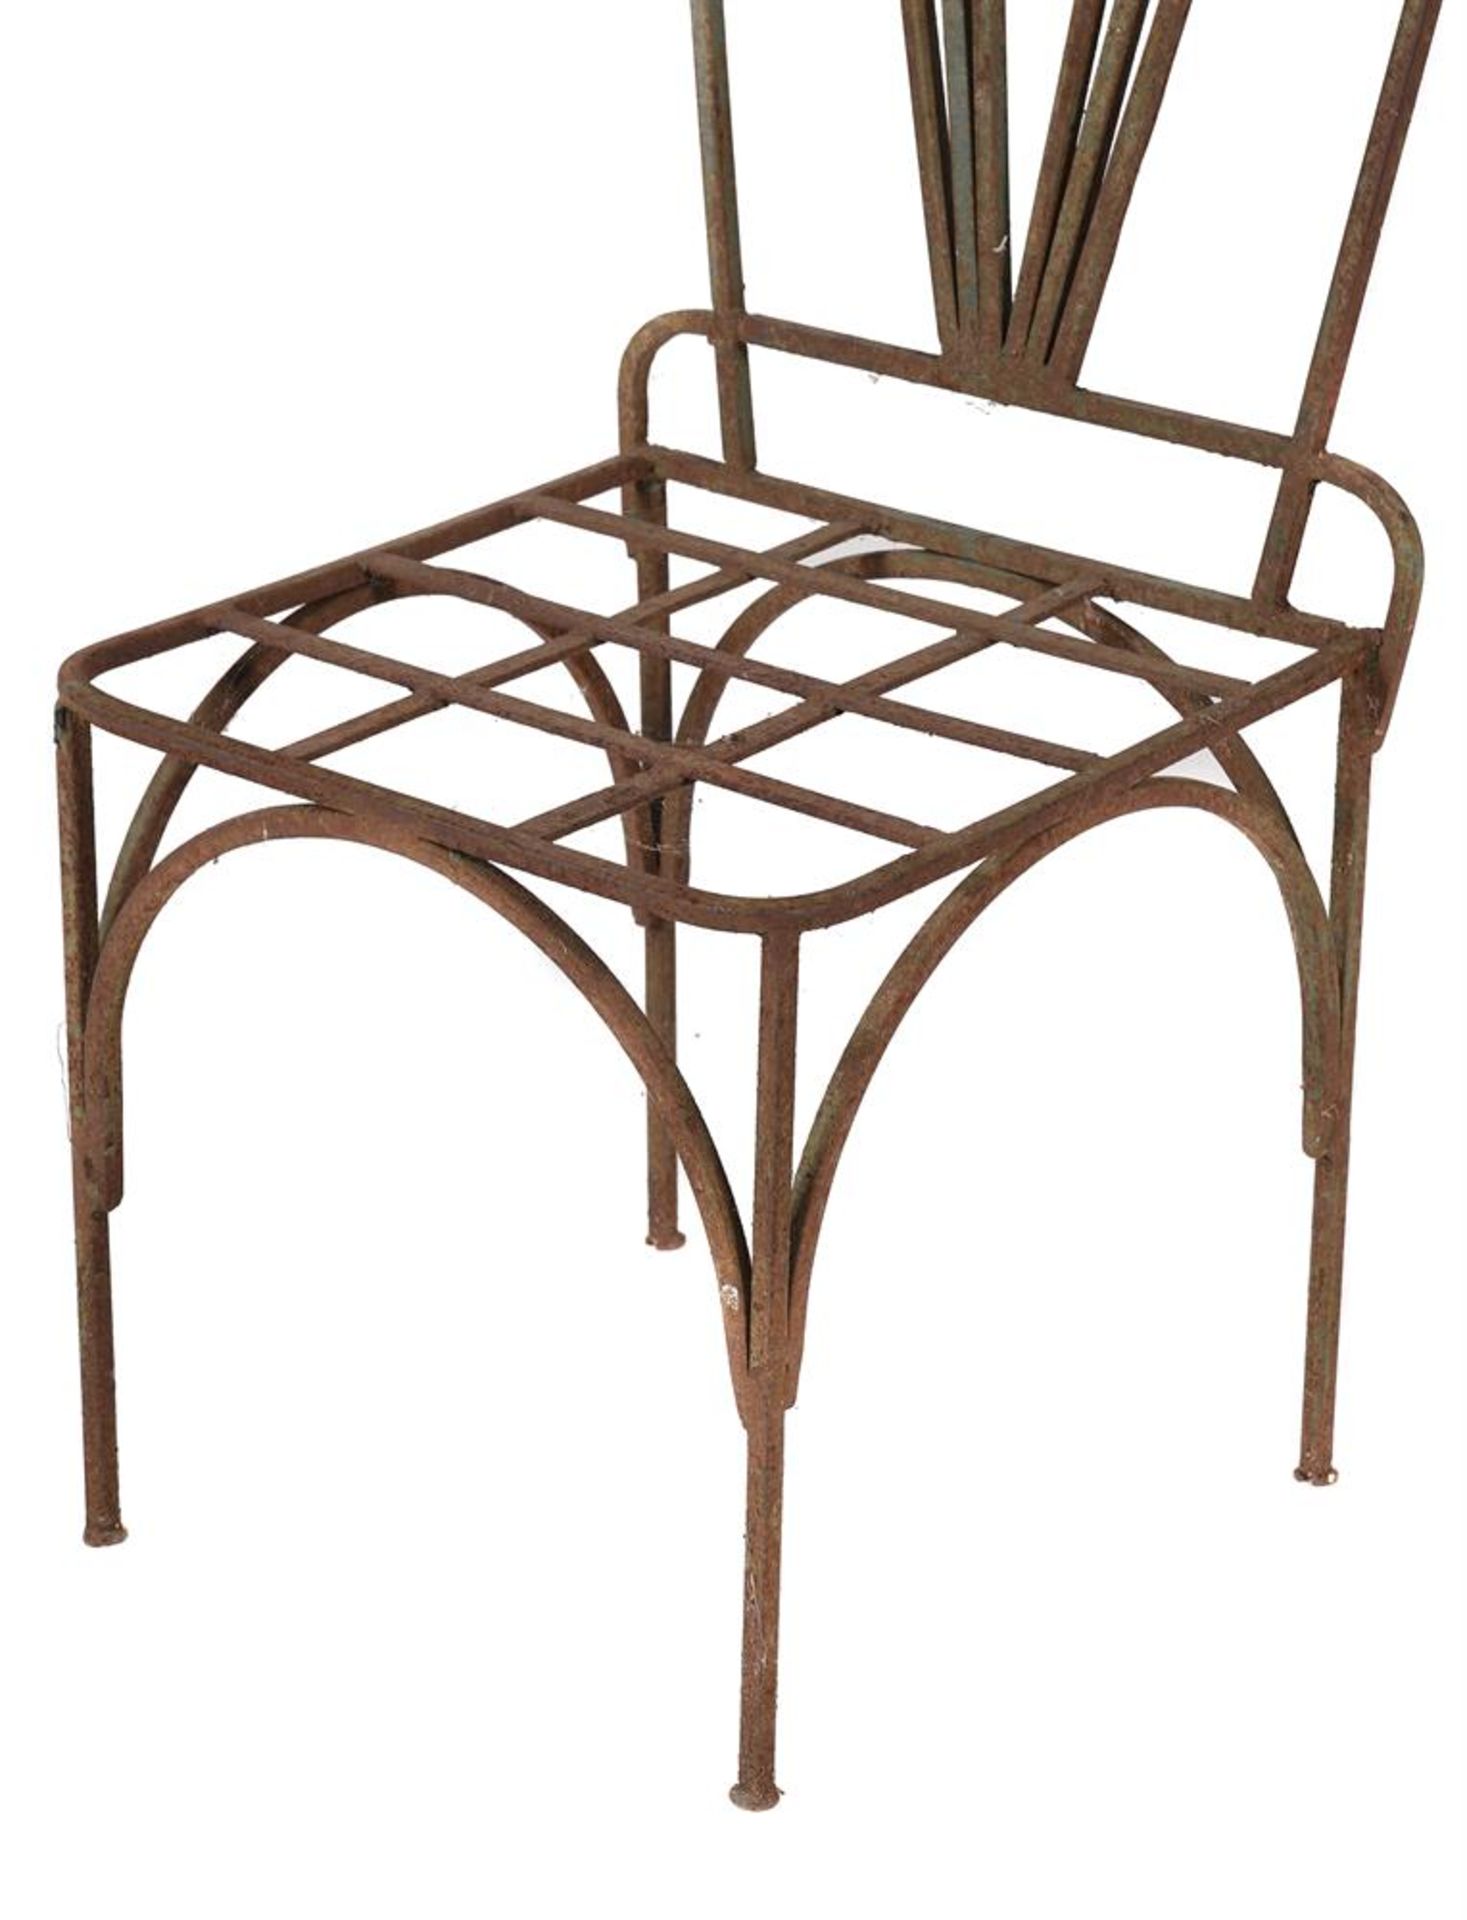 A SET OF TWELVE WROUGHT IRON CHAIRS, 20TH CENTURY - Image 3 of 4